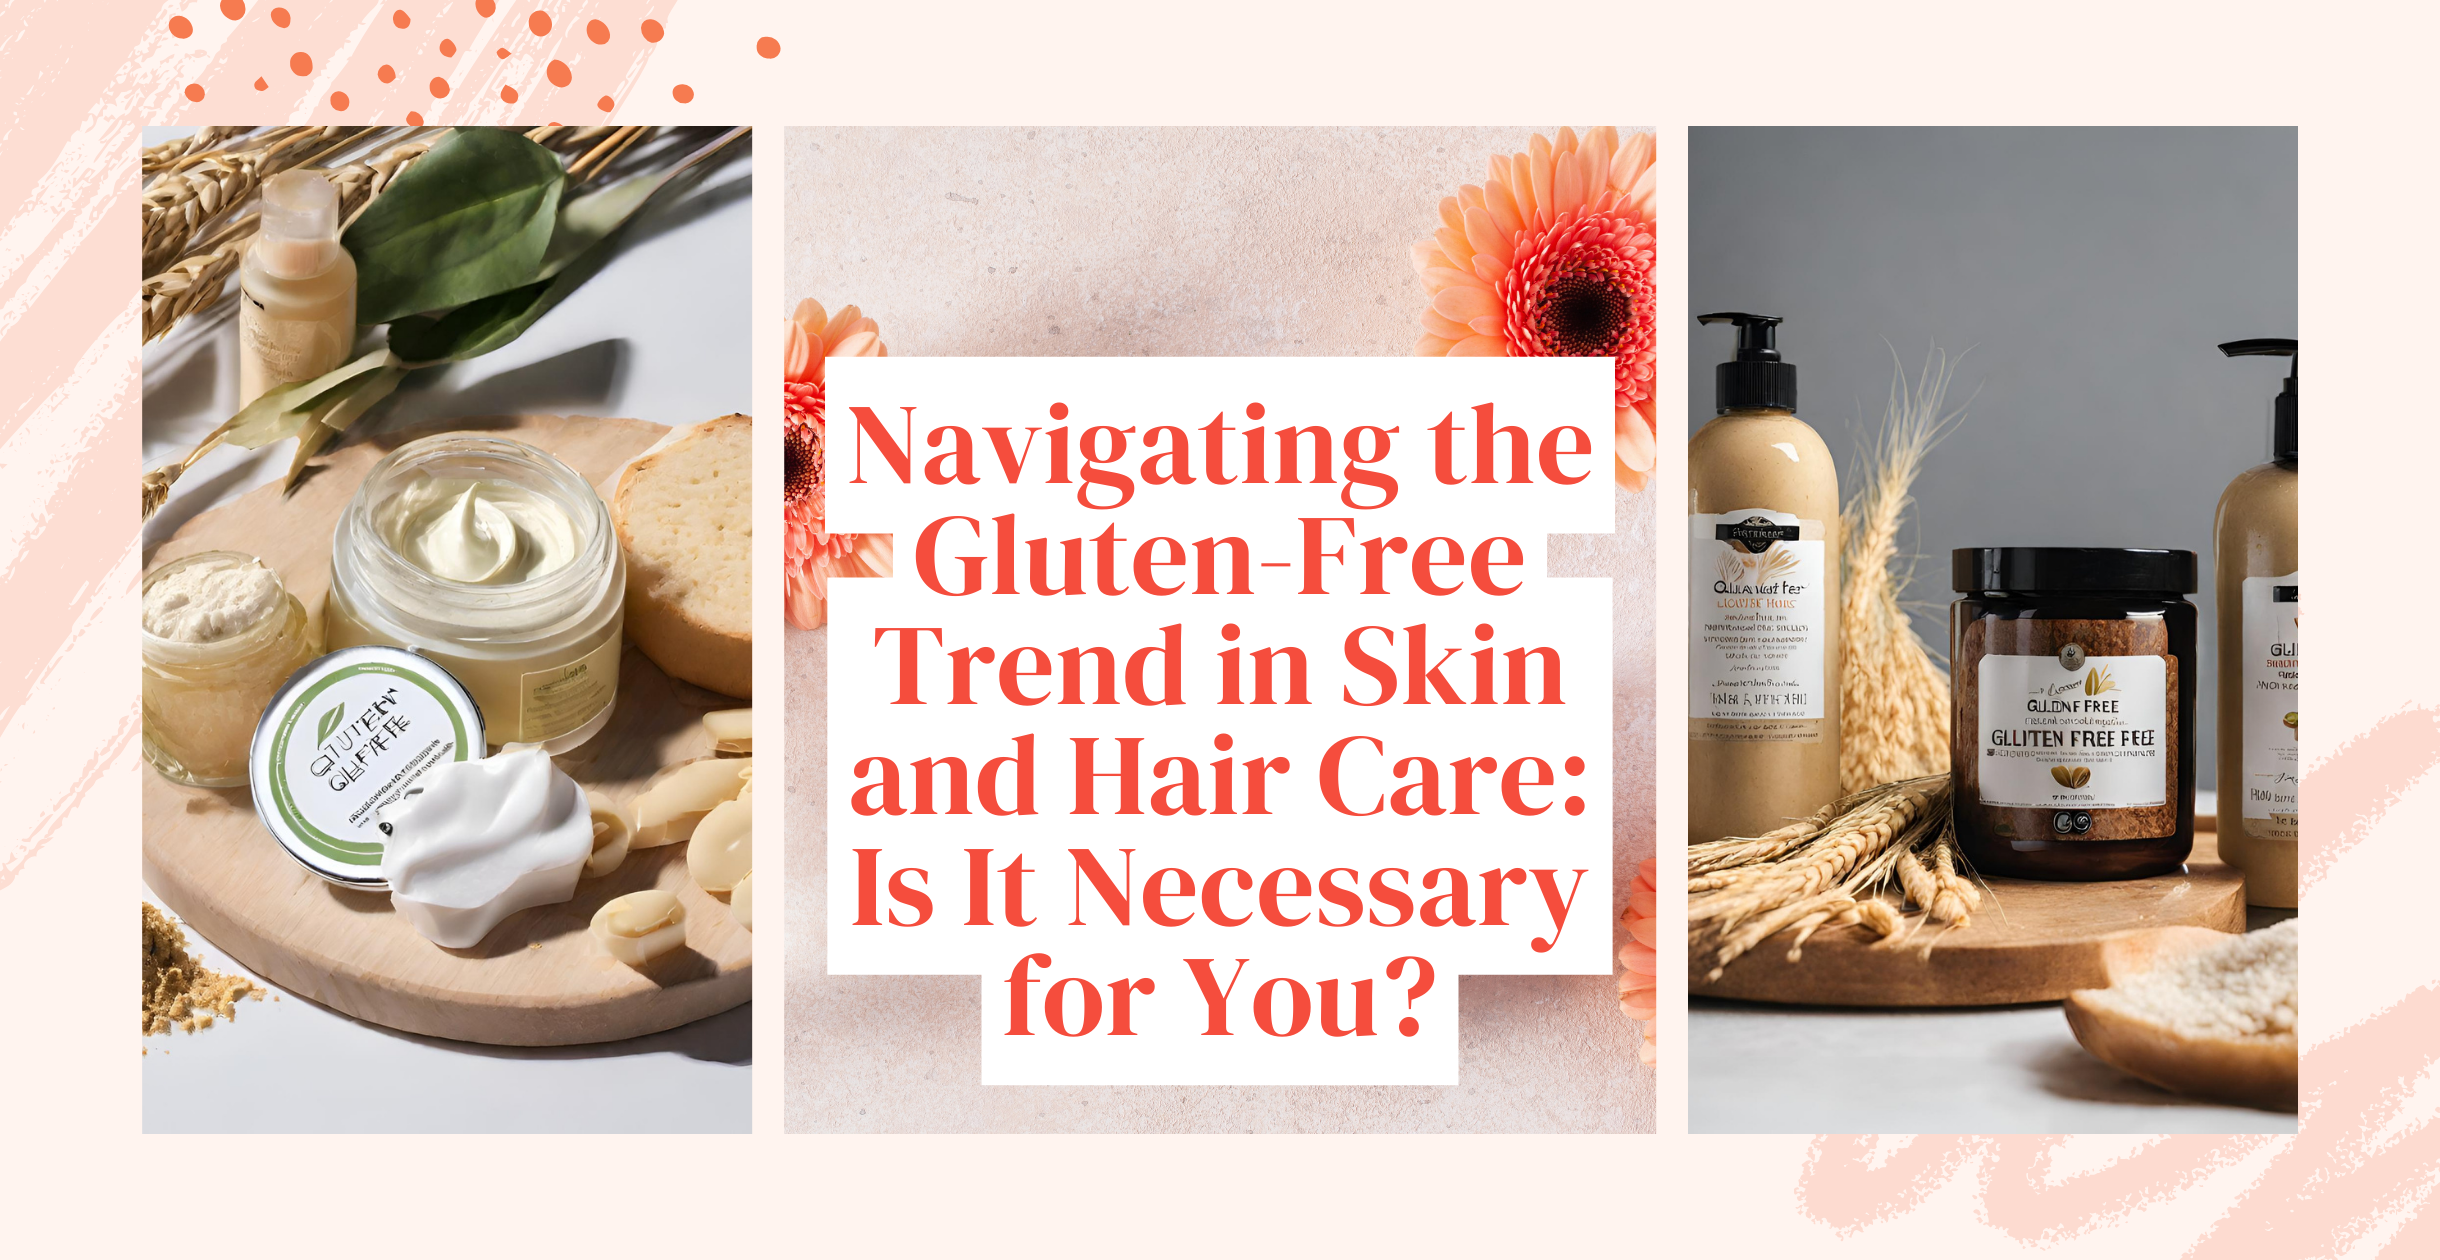 Navigating the Gluten-Free Trend in Skin and Hair Care: Is It Necessary for You?